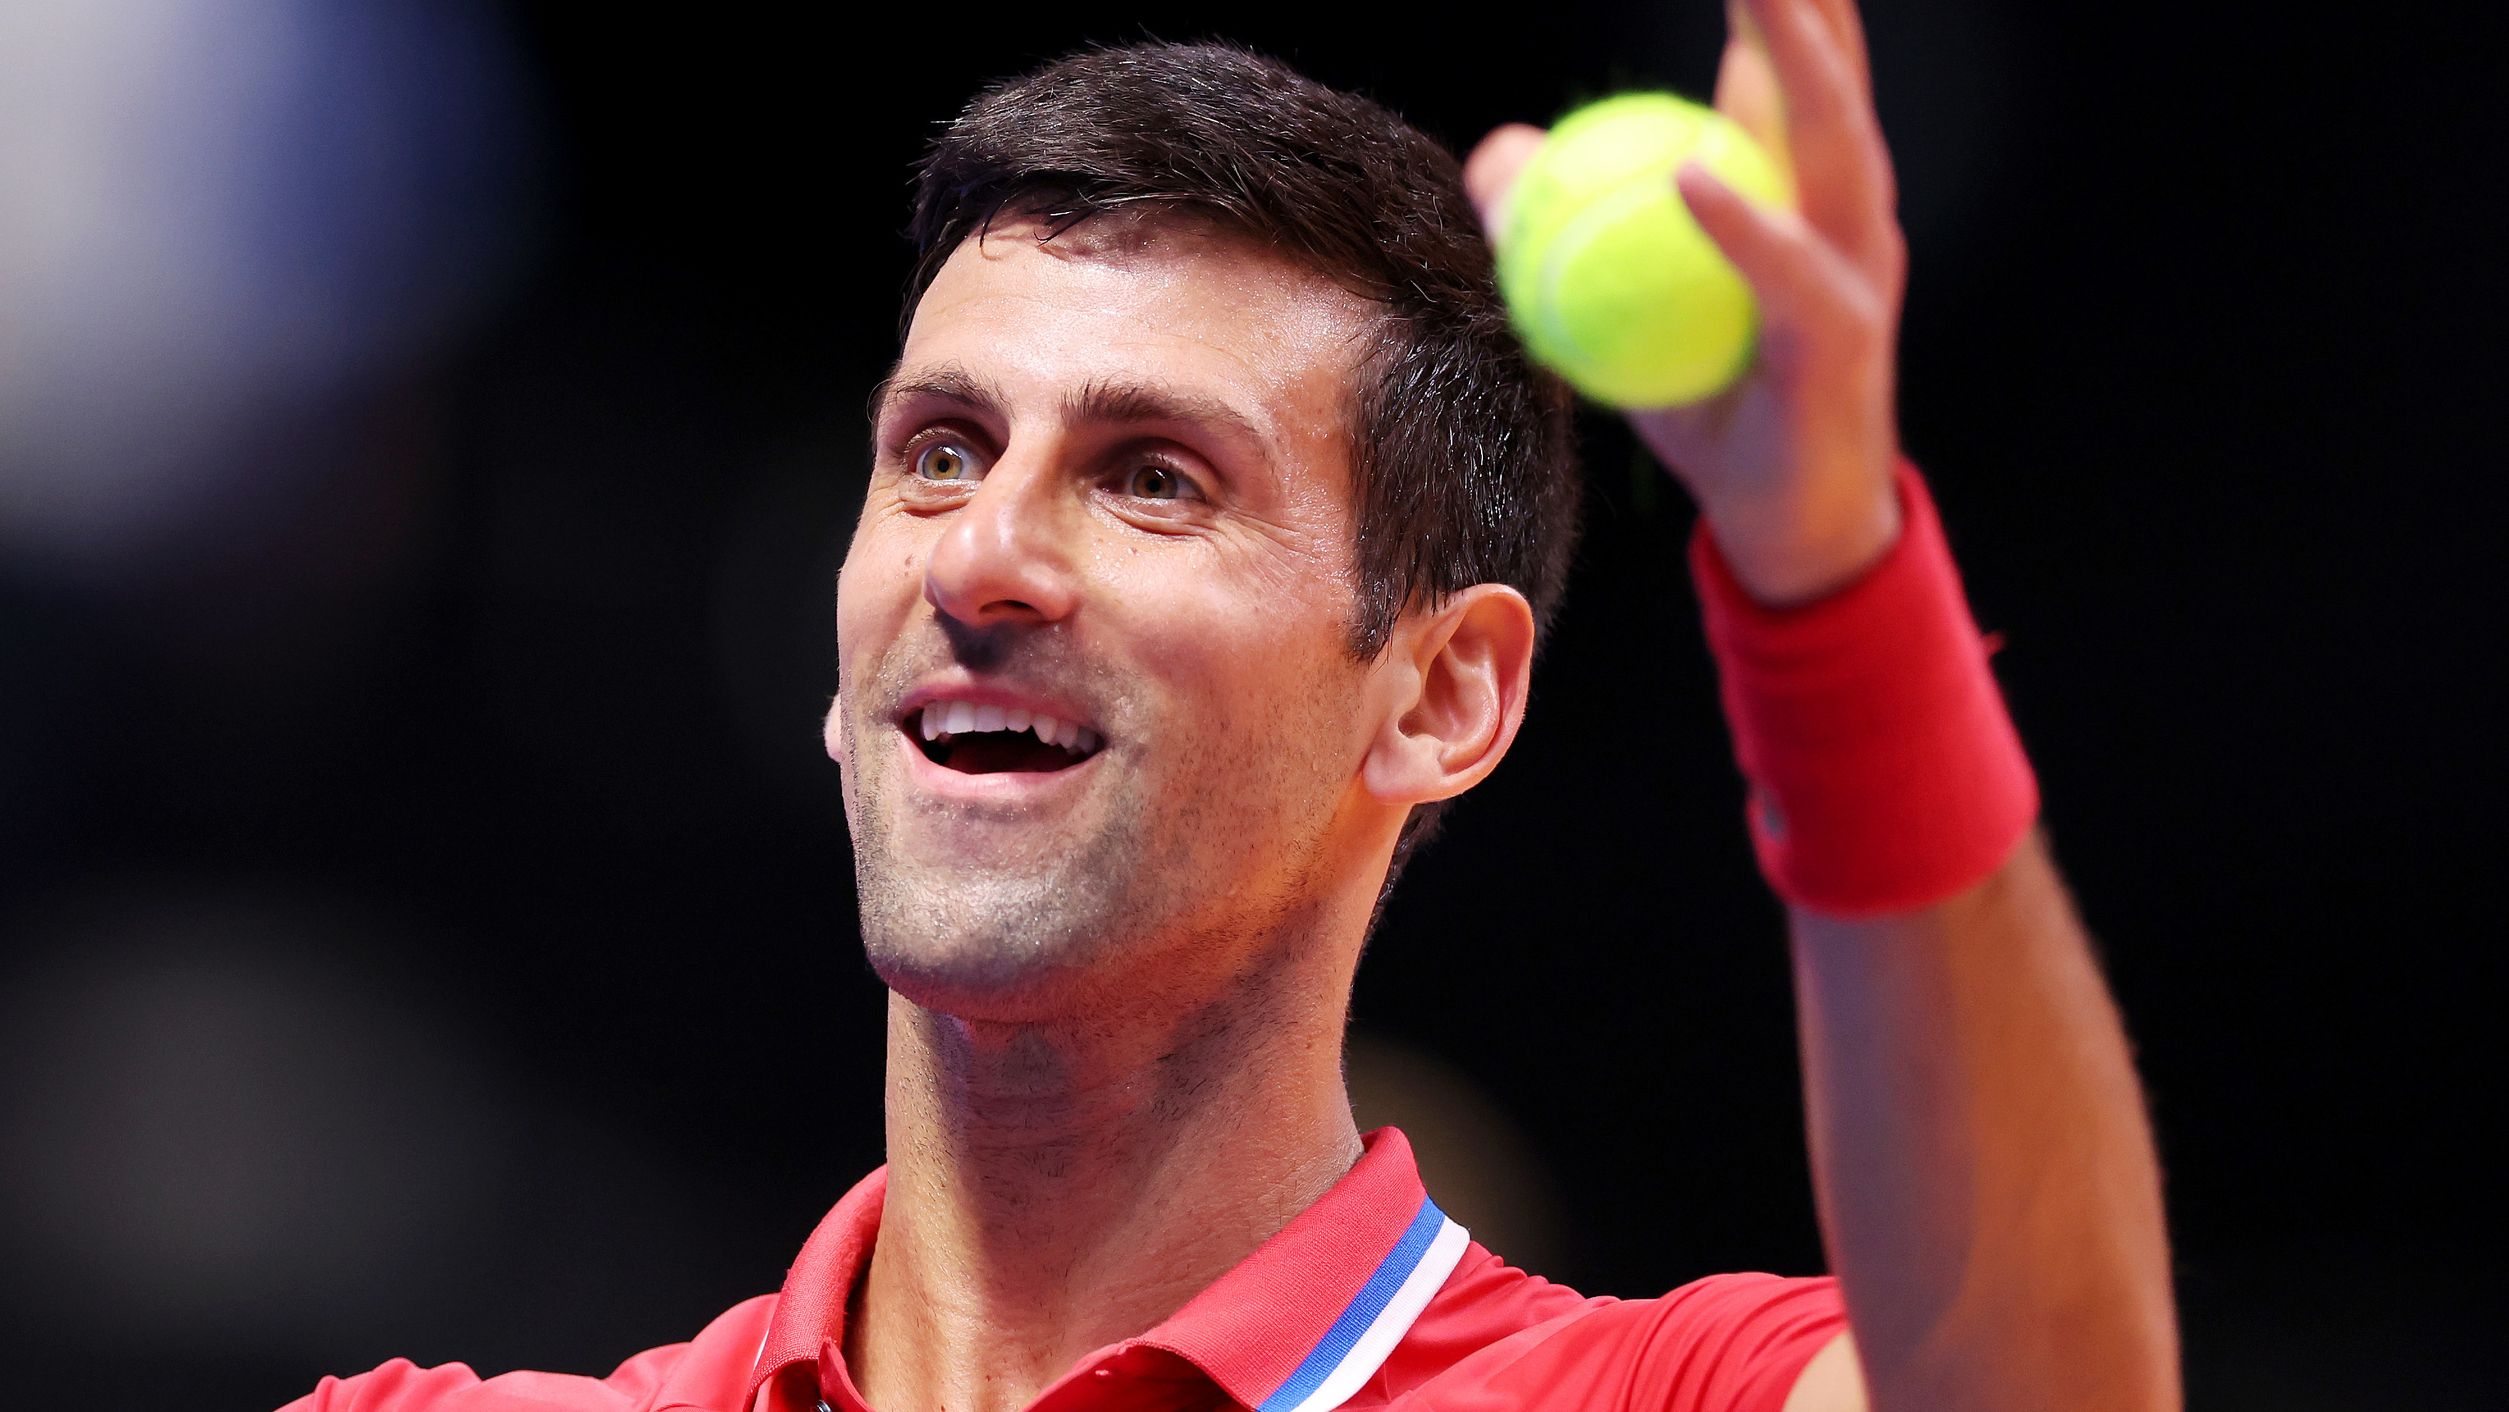 DUBAI, UNITED ARAB EMIRATES - DECEMBER 23: Novak Djokovic of Falcons reacts while playing against Sebastian Ofner of Kites during day five of the World Tennis League at Coca-Cola Arena on December 23, 2022 in Dubai, United Arab Emirates. (Photo by Christopher Pike/Getty Images)